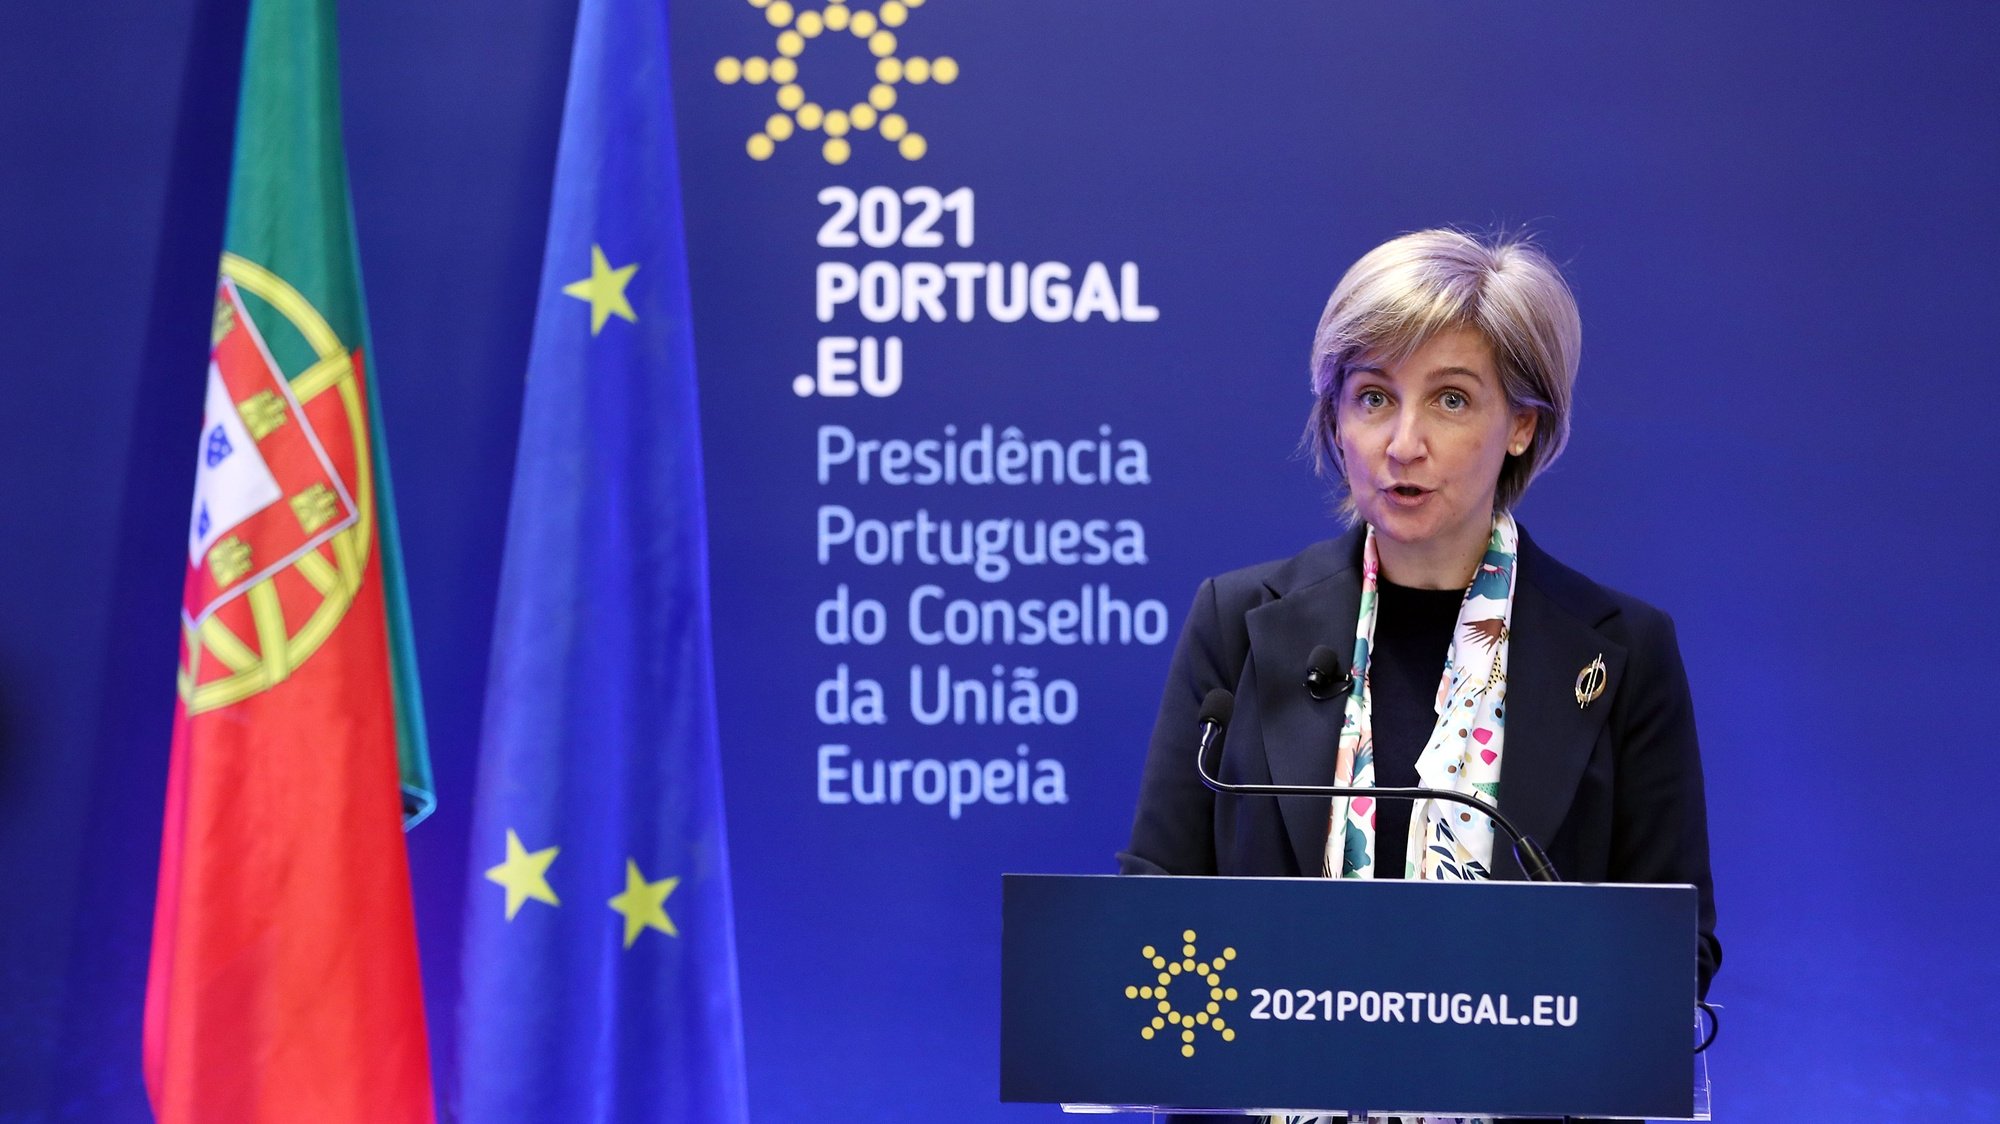 Portuguese Minister for Health Marta Temido attends a conference on strengthening the role of the European Union in the context of global health under the Portuguese Presidency of the Council, in Lisbon, Portugal, 25 March 2021. The conference is dedicated to the topic of reinforcement of the role of the EU in global health, diplomacy, leadership in the plan for universal health coverage, and the impact of climate change on health. ANTONIO PEDRO SANTOS/LUSA